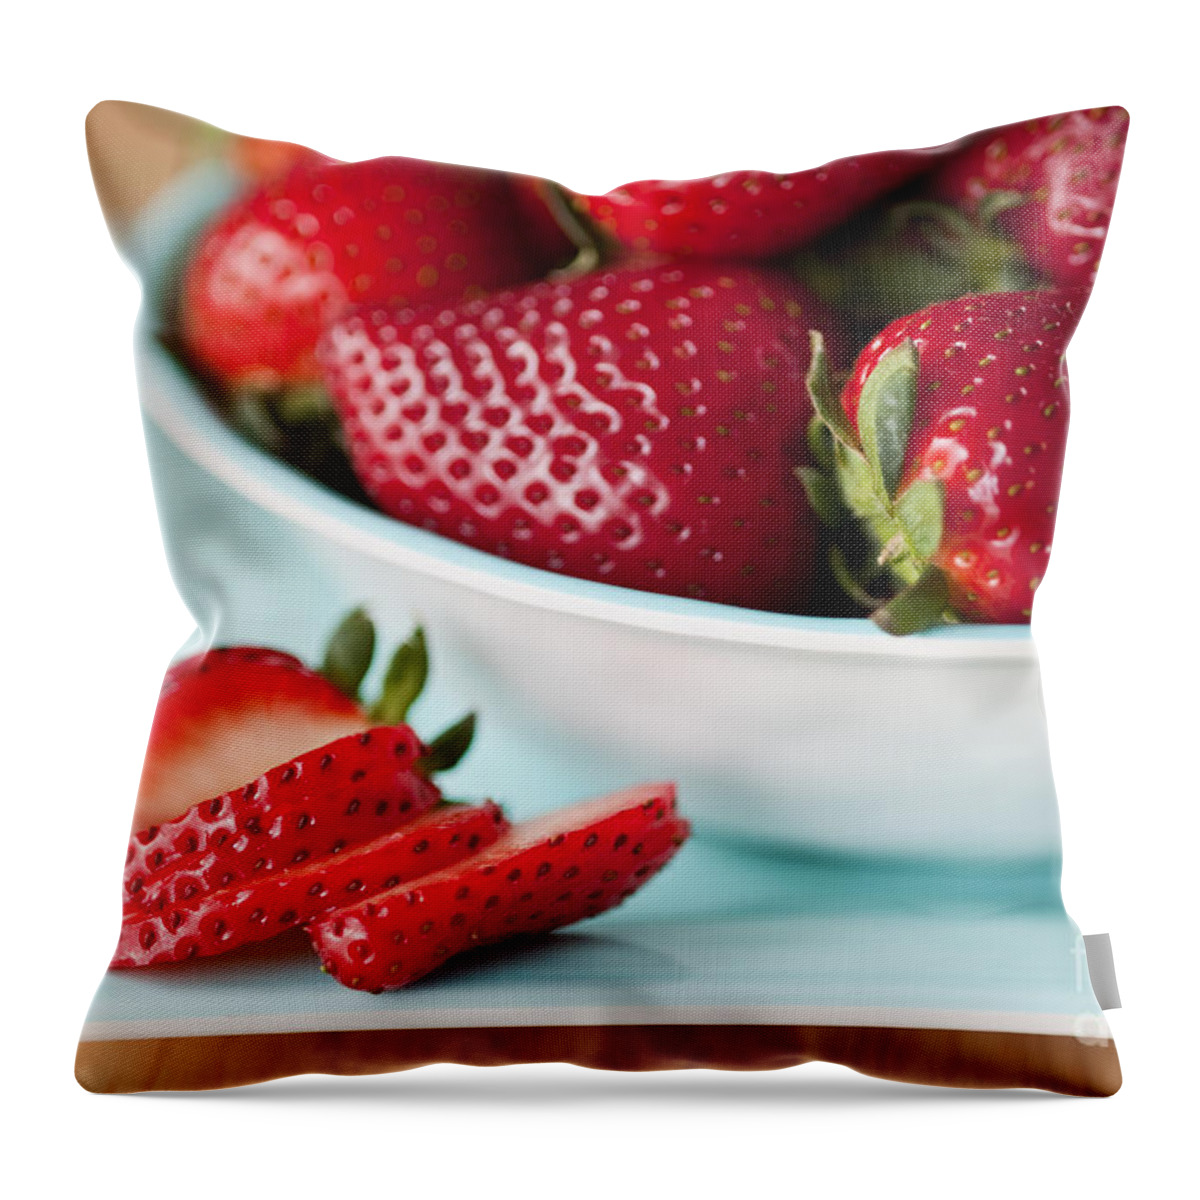 Abundance Throw Pillow featuring the photograph Strawberries In A Bowl On Counter by Jim Corwin